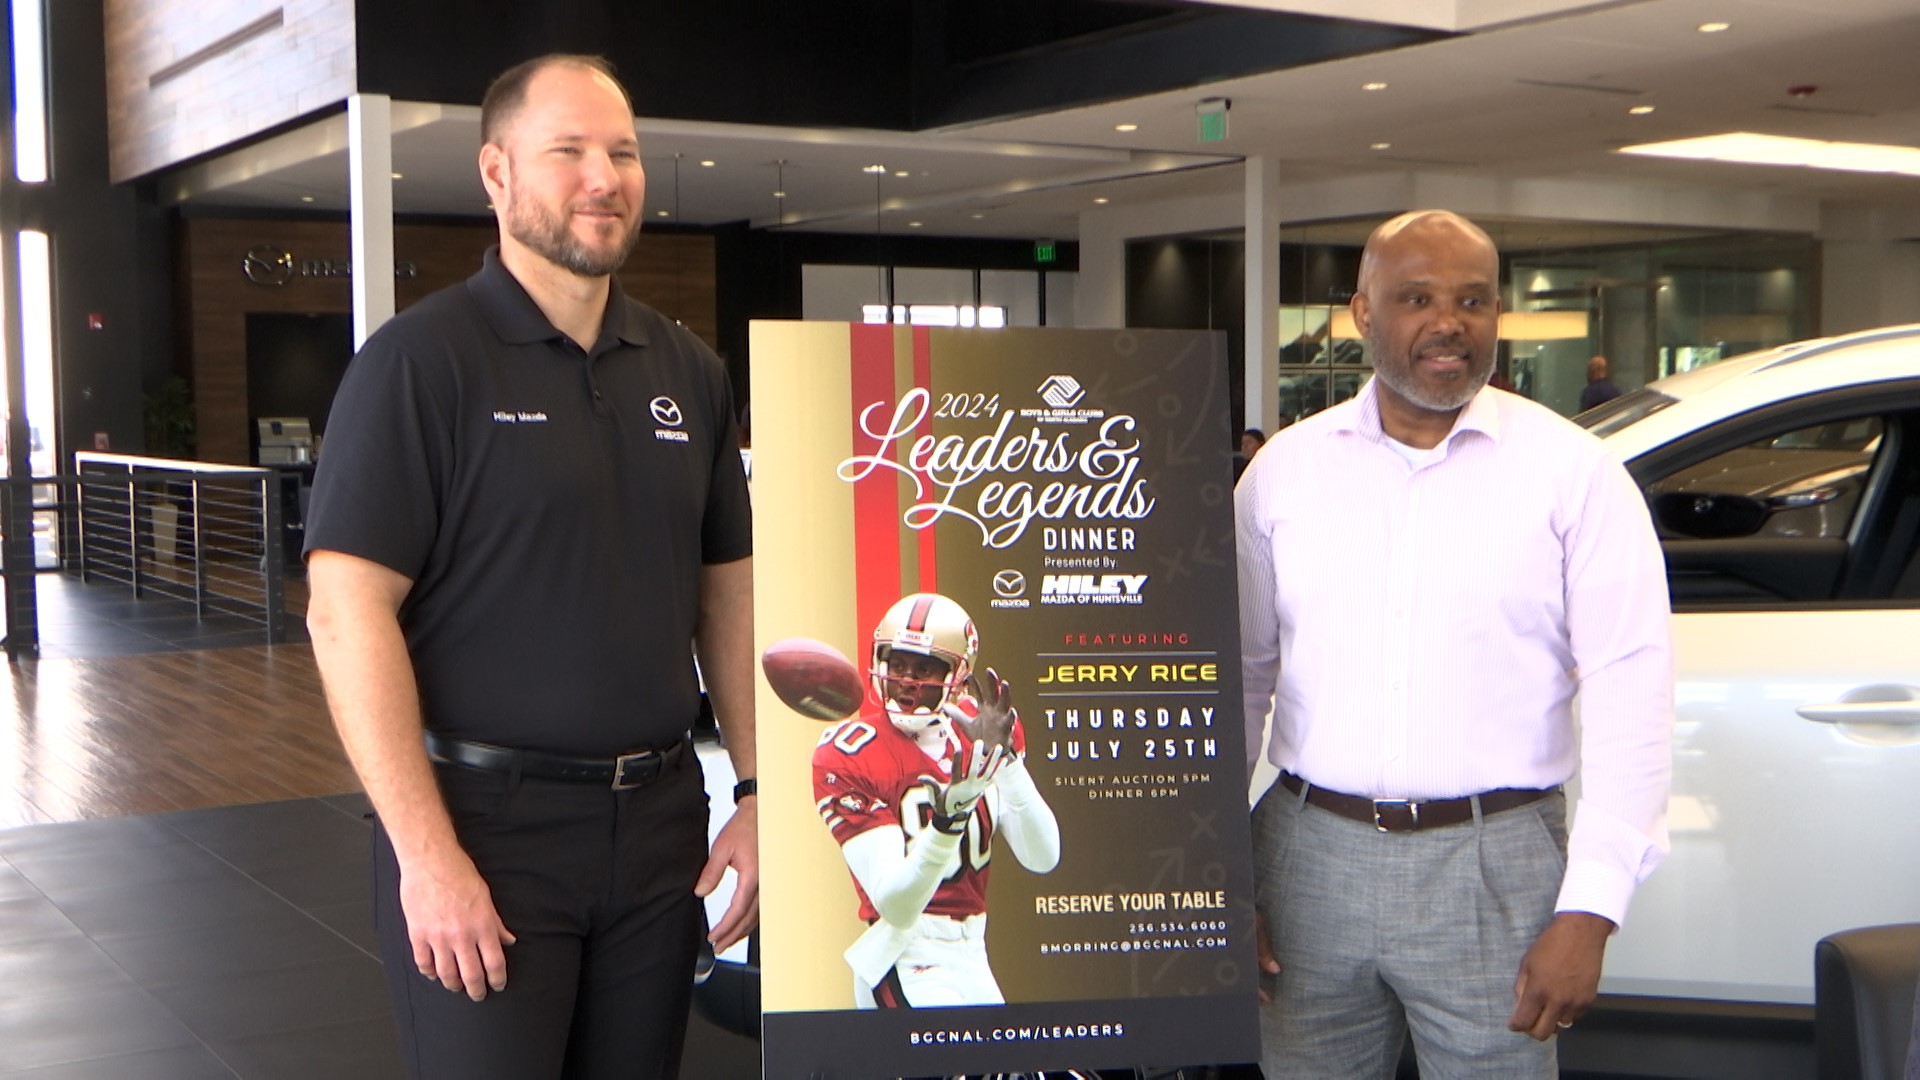 Jerry Rice will serve as a special guest at the annual “Leaders and Legends” Dinner. The annual event is the biggest fundraiser of the year for the Boys & Girls Club